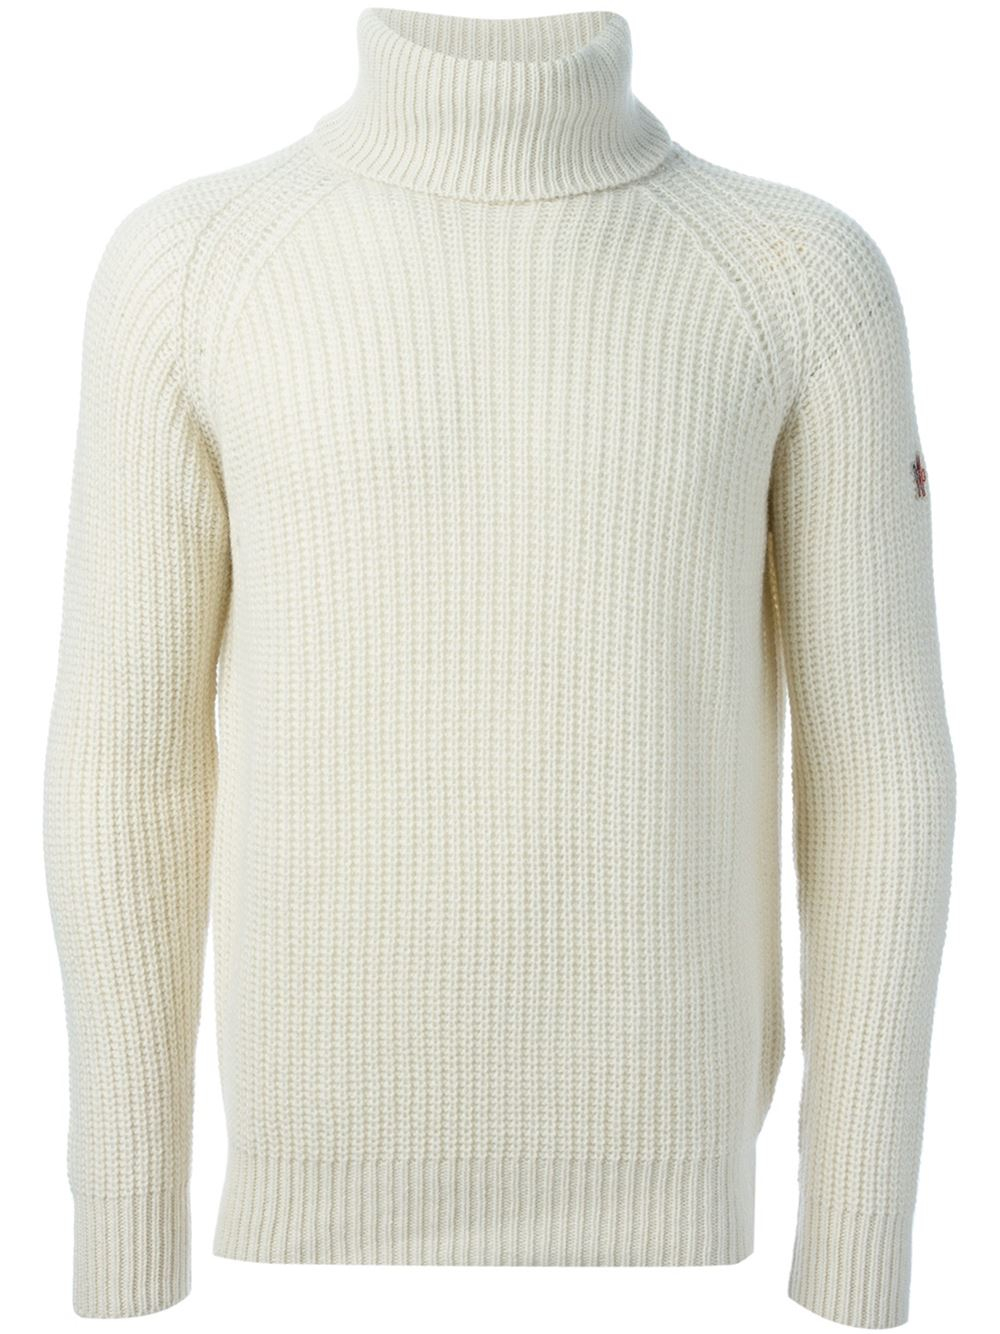 3 MONCLER GRENOBLE Chunky Knit Turtle Neck Sweater in White for 